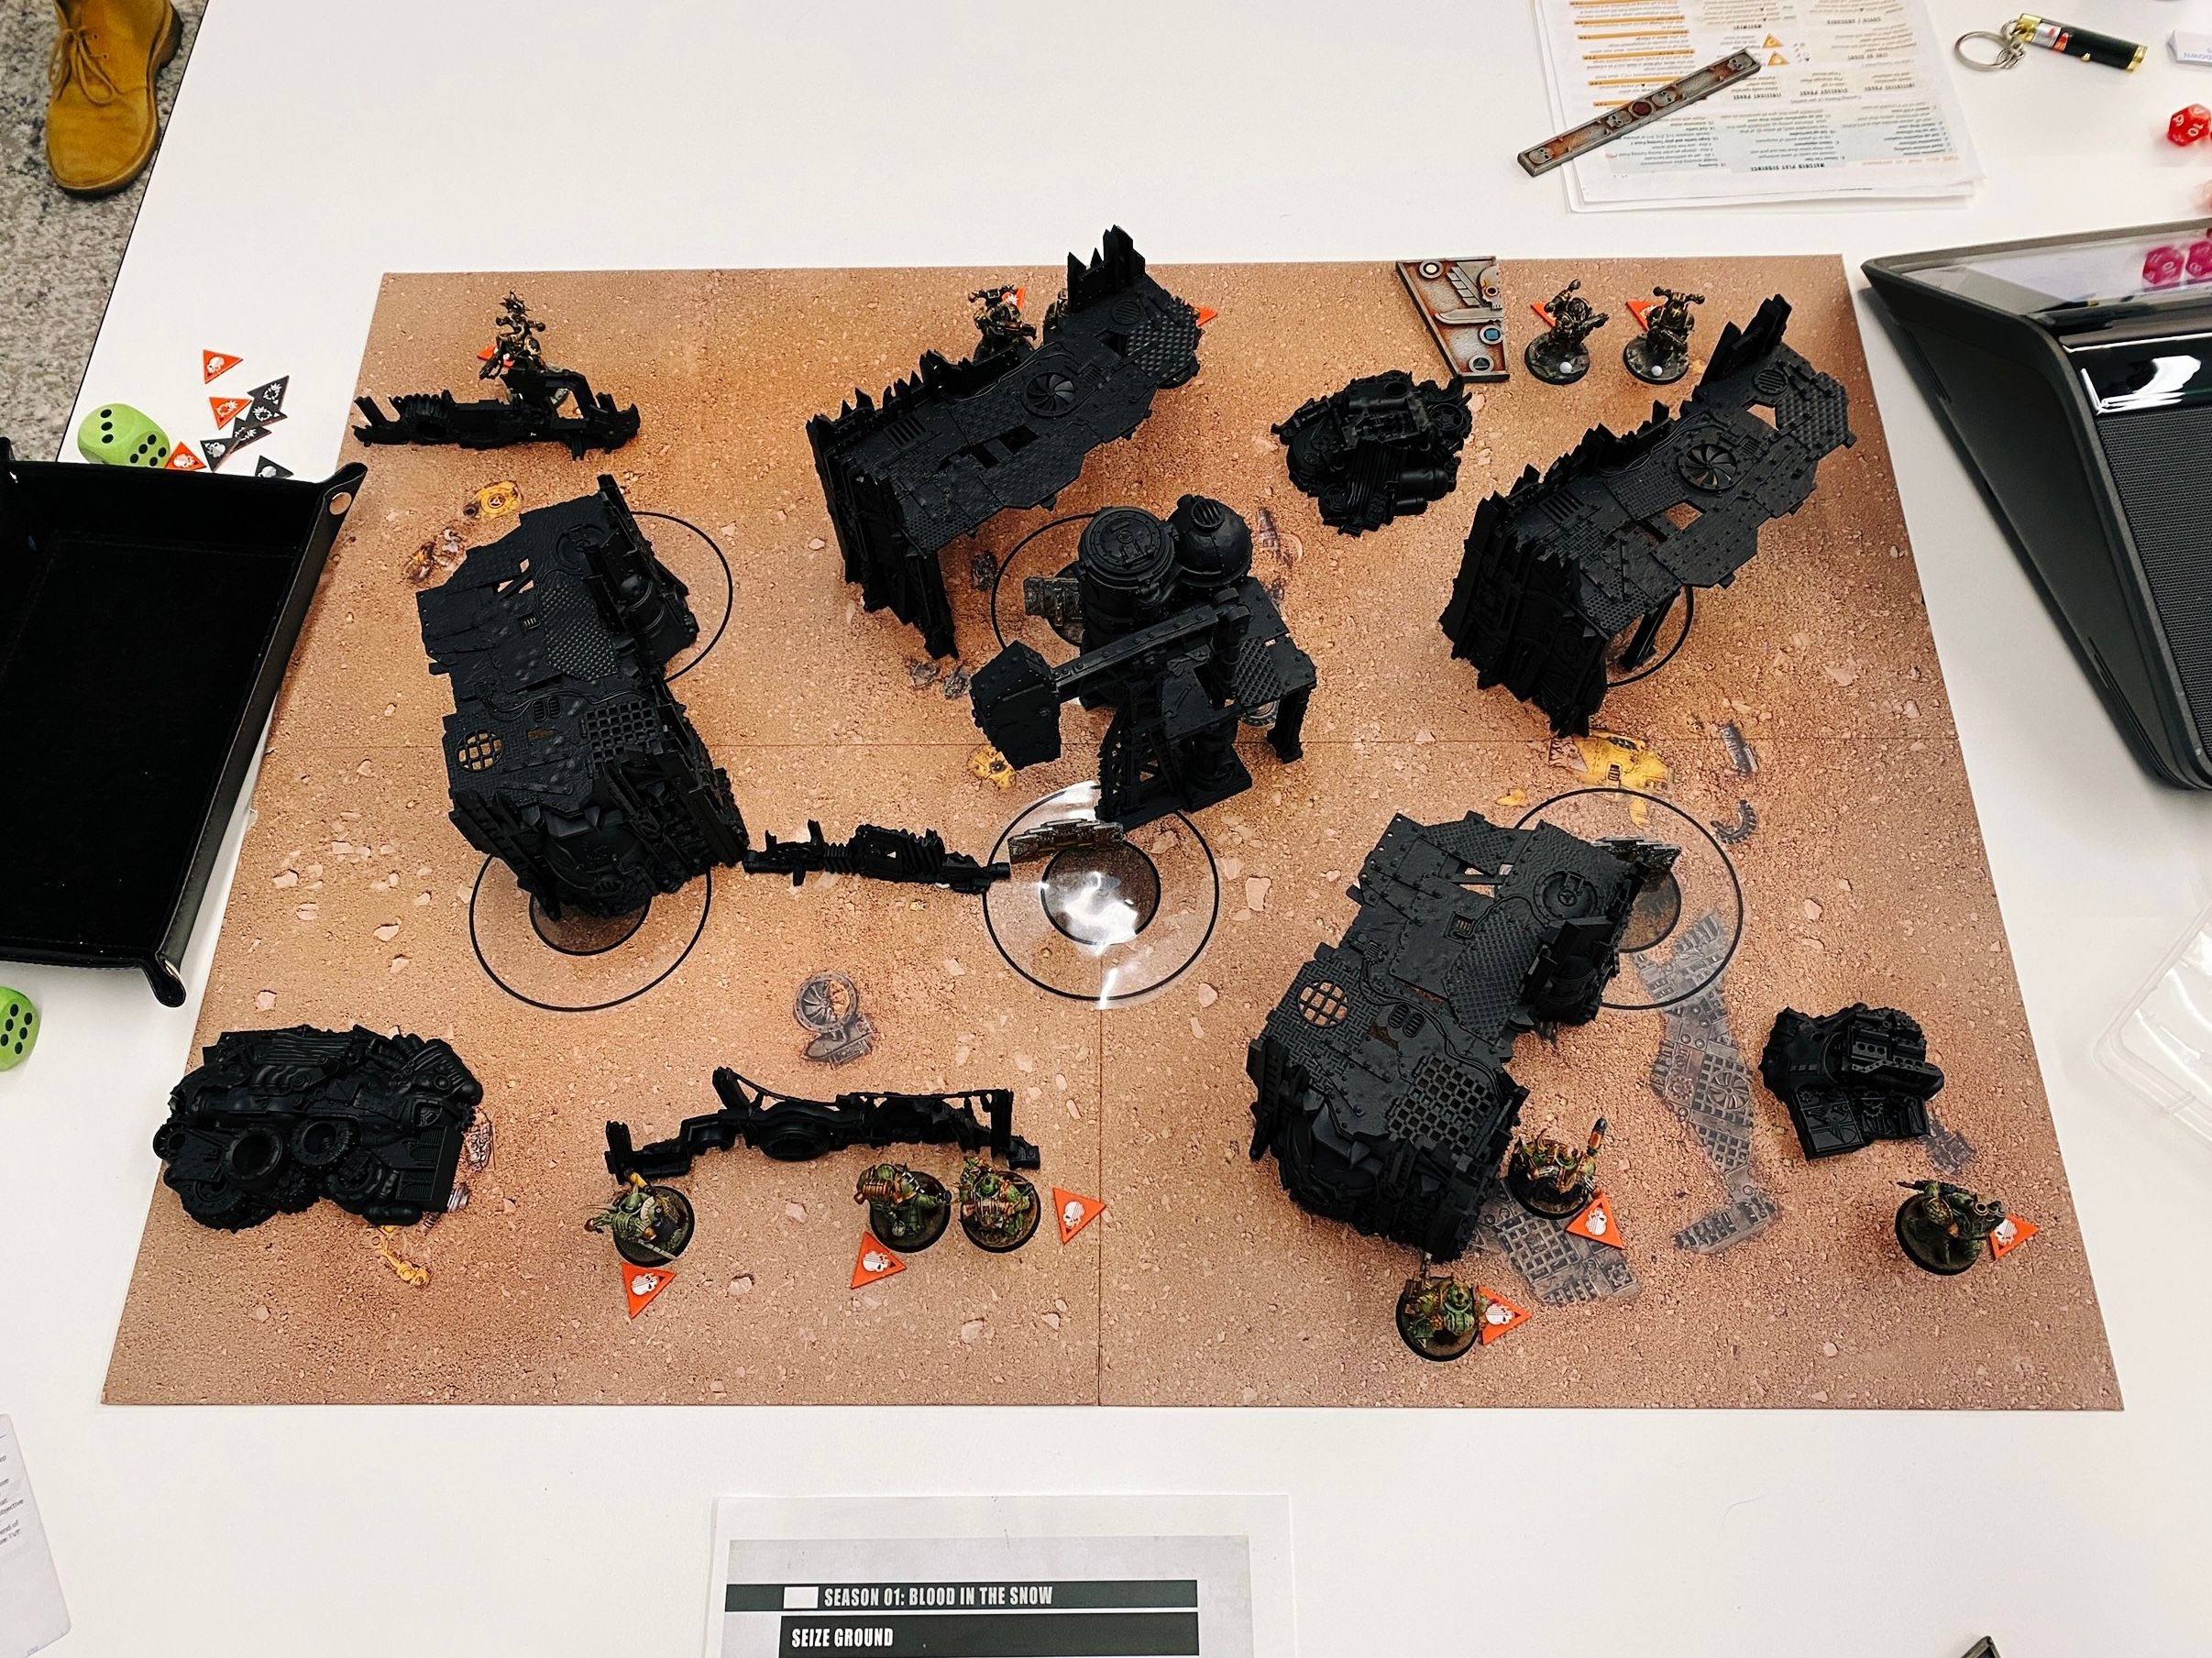 A photo of a Warhammer 40,000 game board, with painted miniatures and shamefully unpainted terrain that looks like a junkyard on it. (...the terrain itself looks like a junkyard, the fact that it's shamefully unpainted is unrelated to this.)